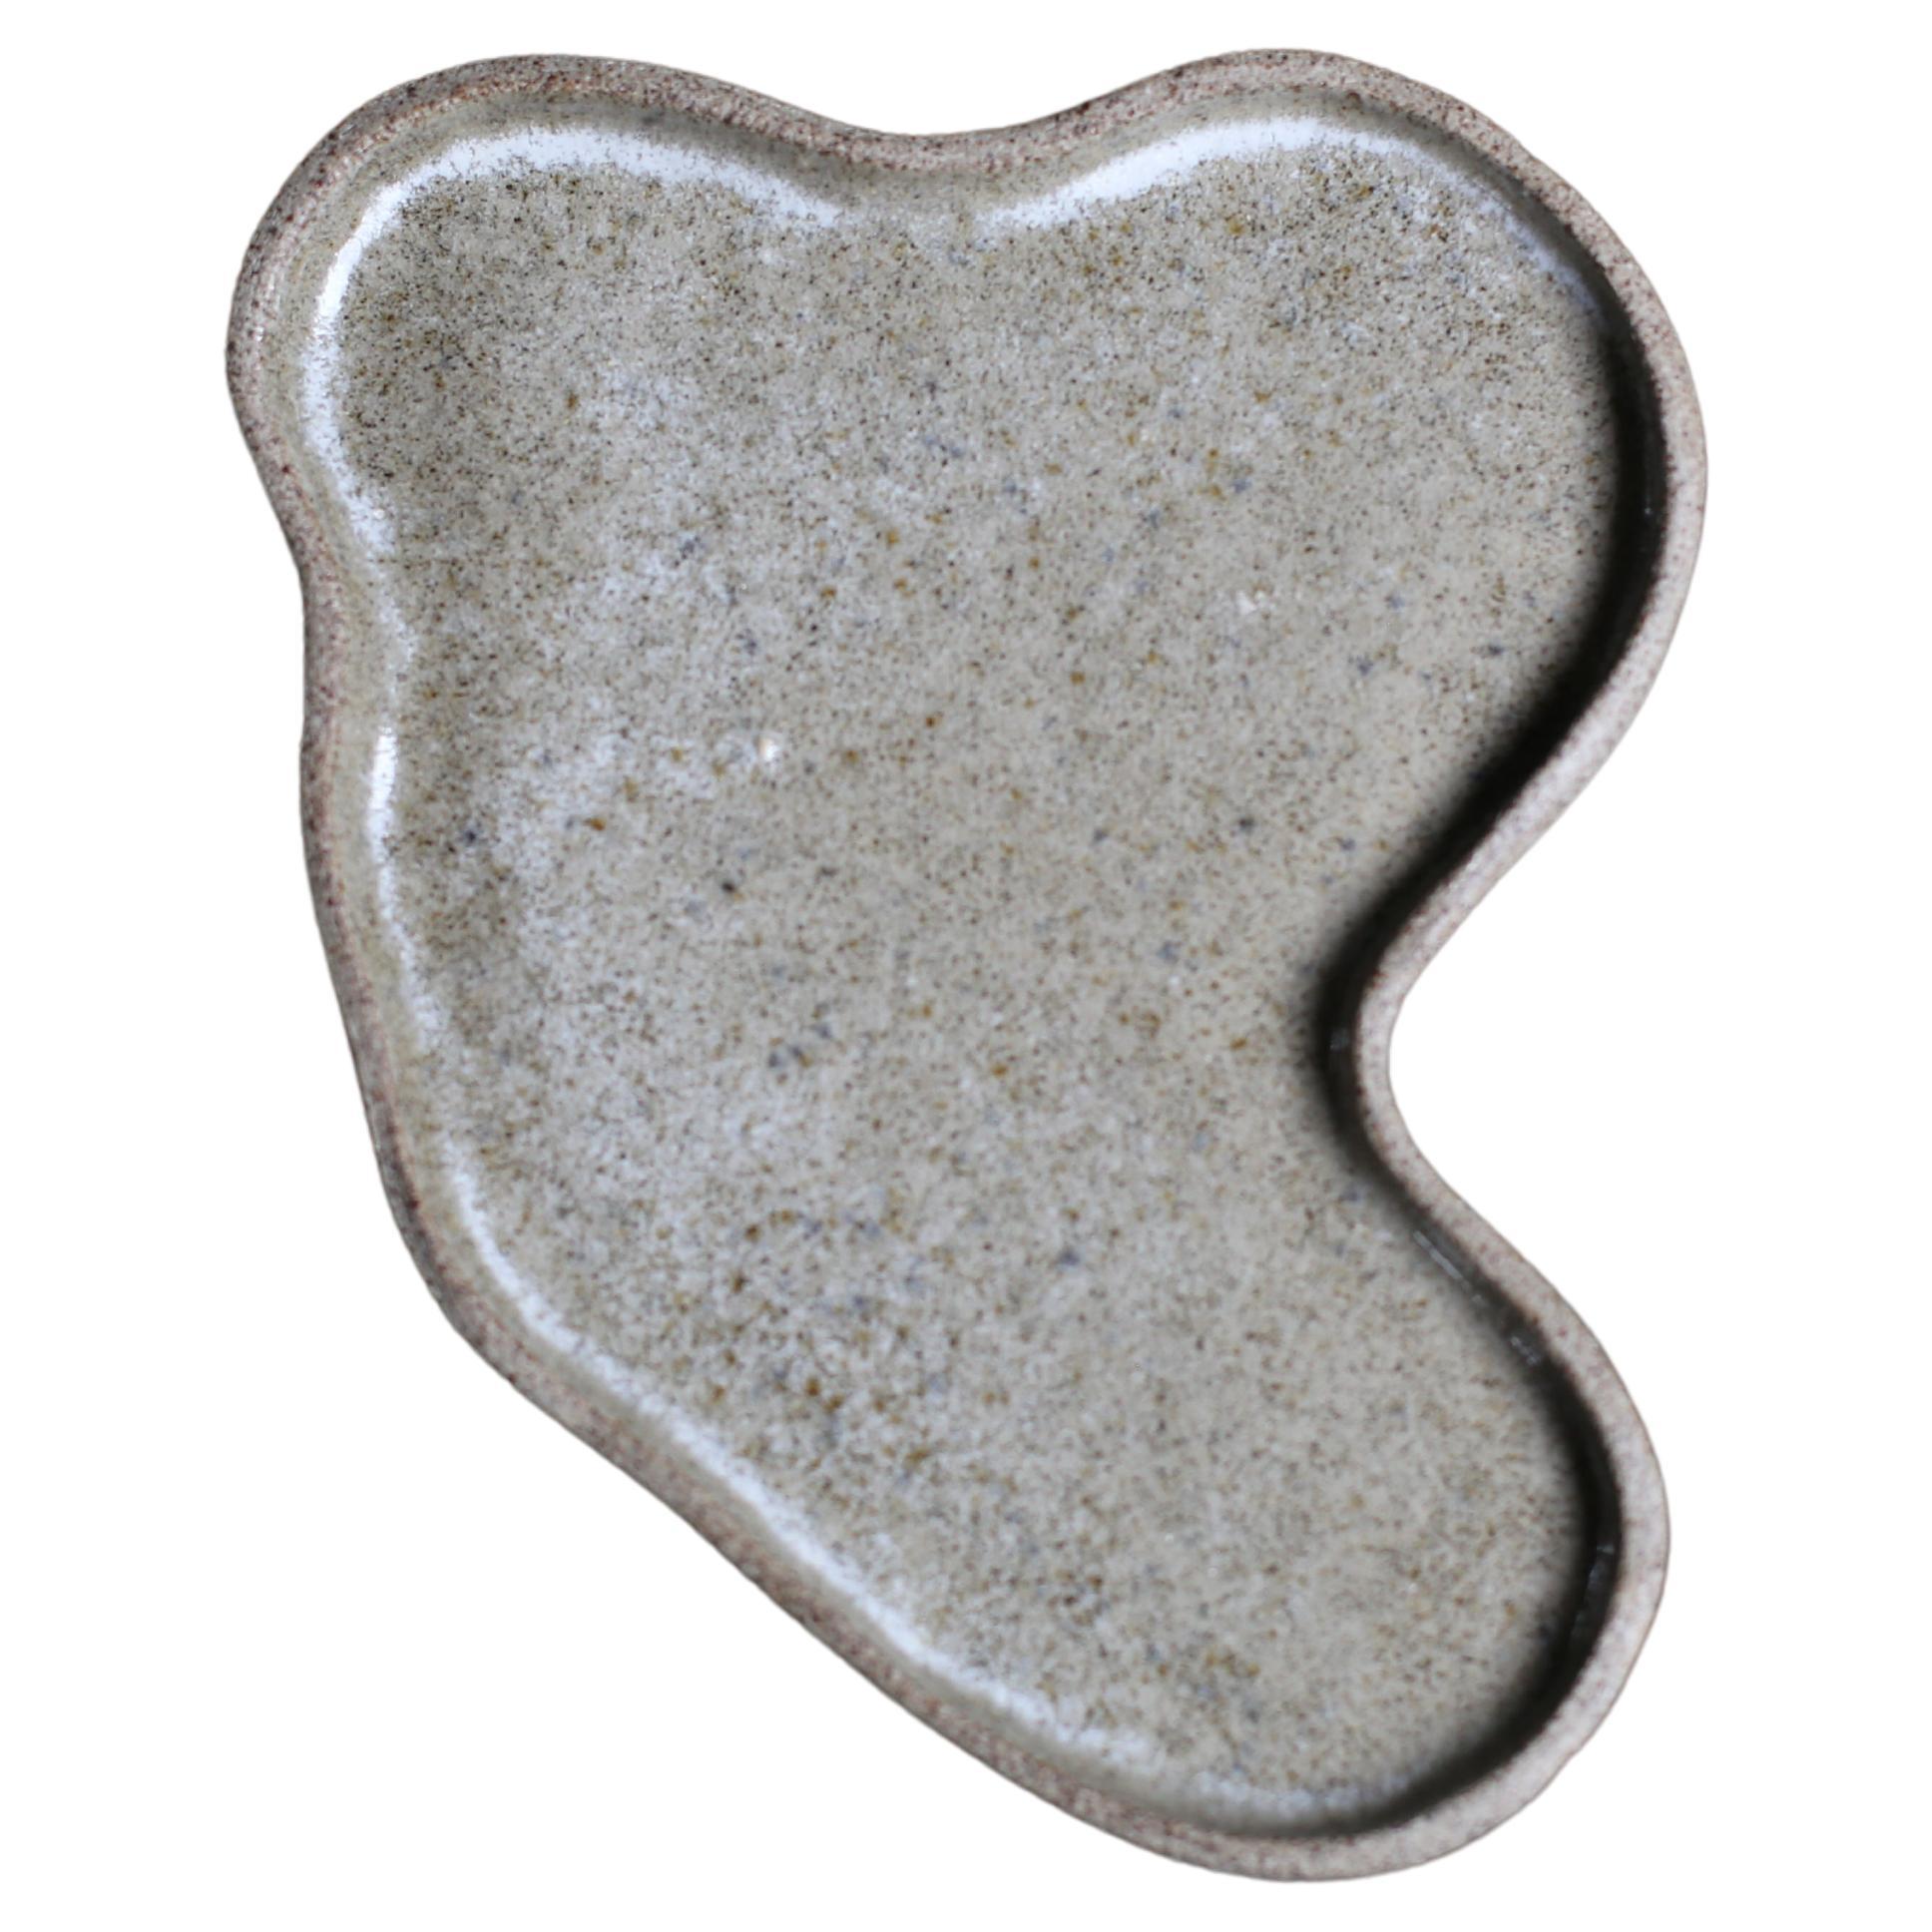 Puddle Plate in Speckled Grey Clay and Sheer Glaze, Medium